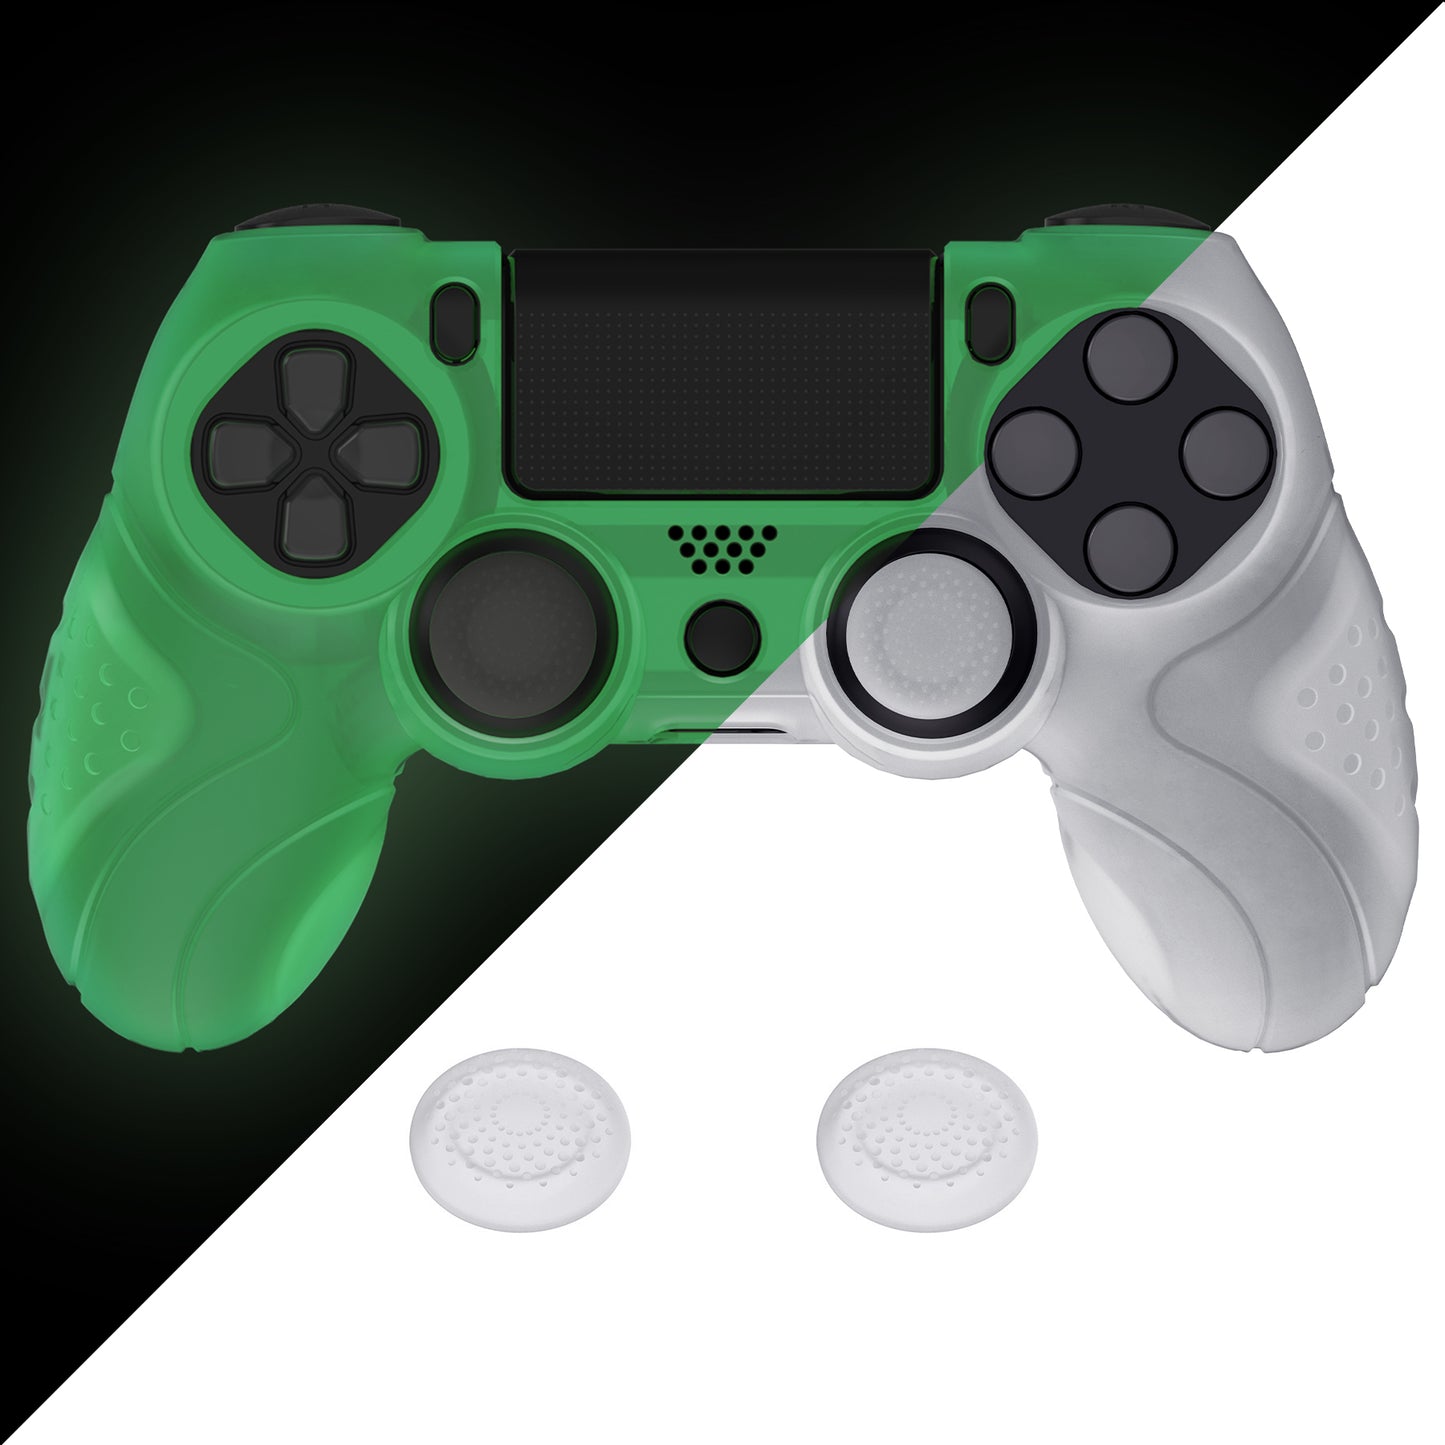 PlayVital Guardian Edition Glow in Dark - Green Ergonomic Soft Anti-Slip Controller Silicone Case Cover for ps4, Rubber Protector Skin with Joystick Caps for ps4 Slim/Pro Controller - P4CC0069 playvital